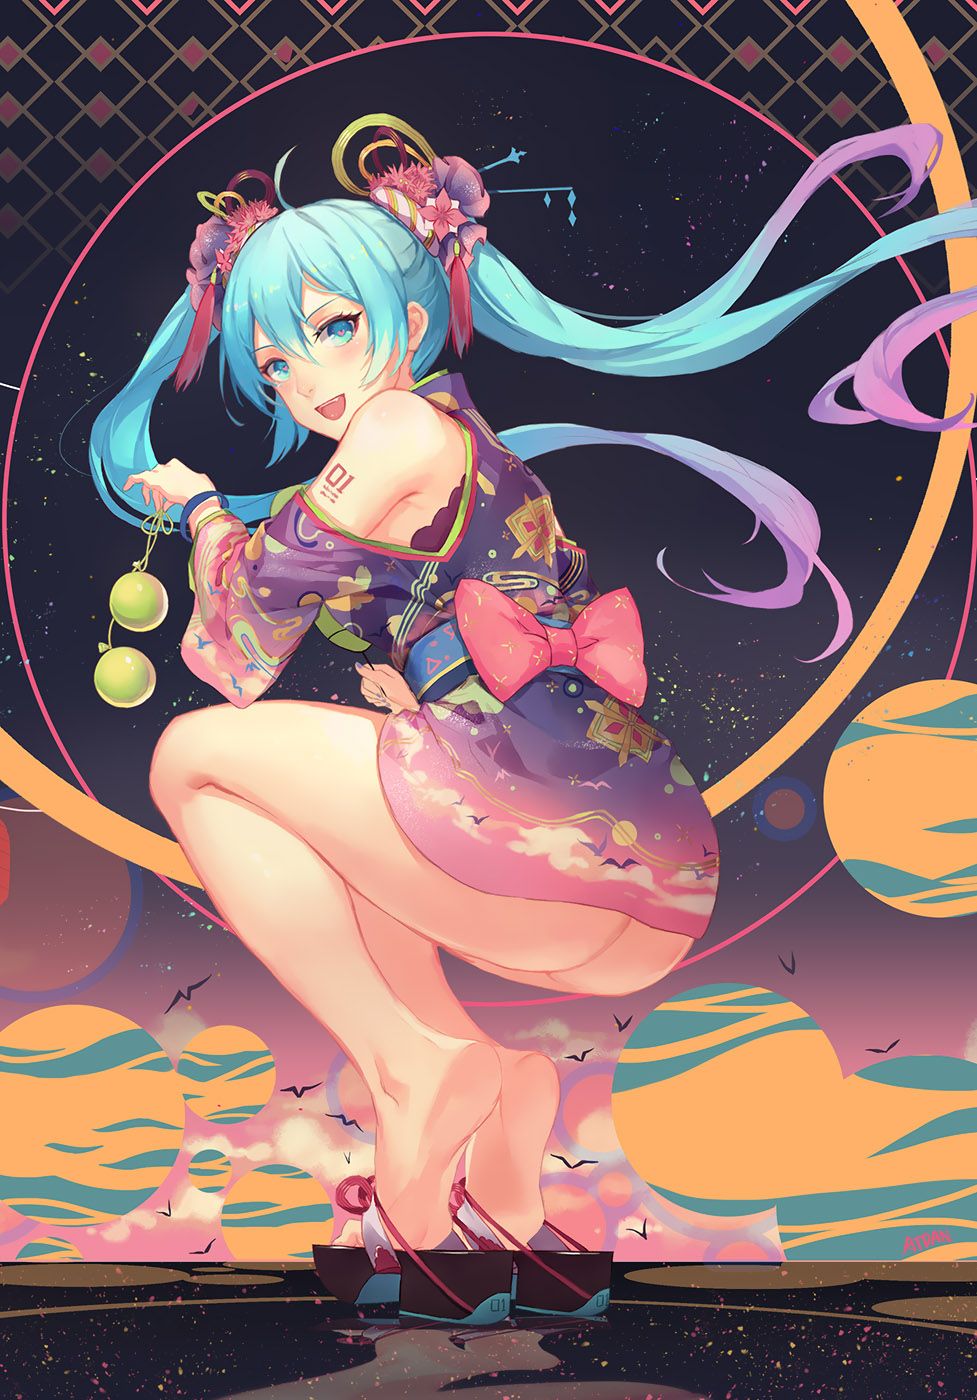 [Vocaloid] hatsune miku, imaging-related images and five! [Pictures and wallpapers] (Vocaloid VOCALOID 13) 3